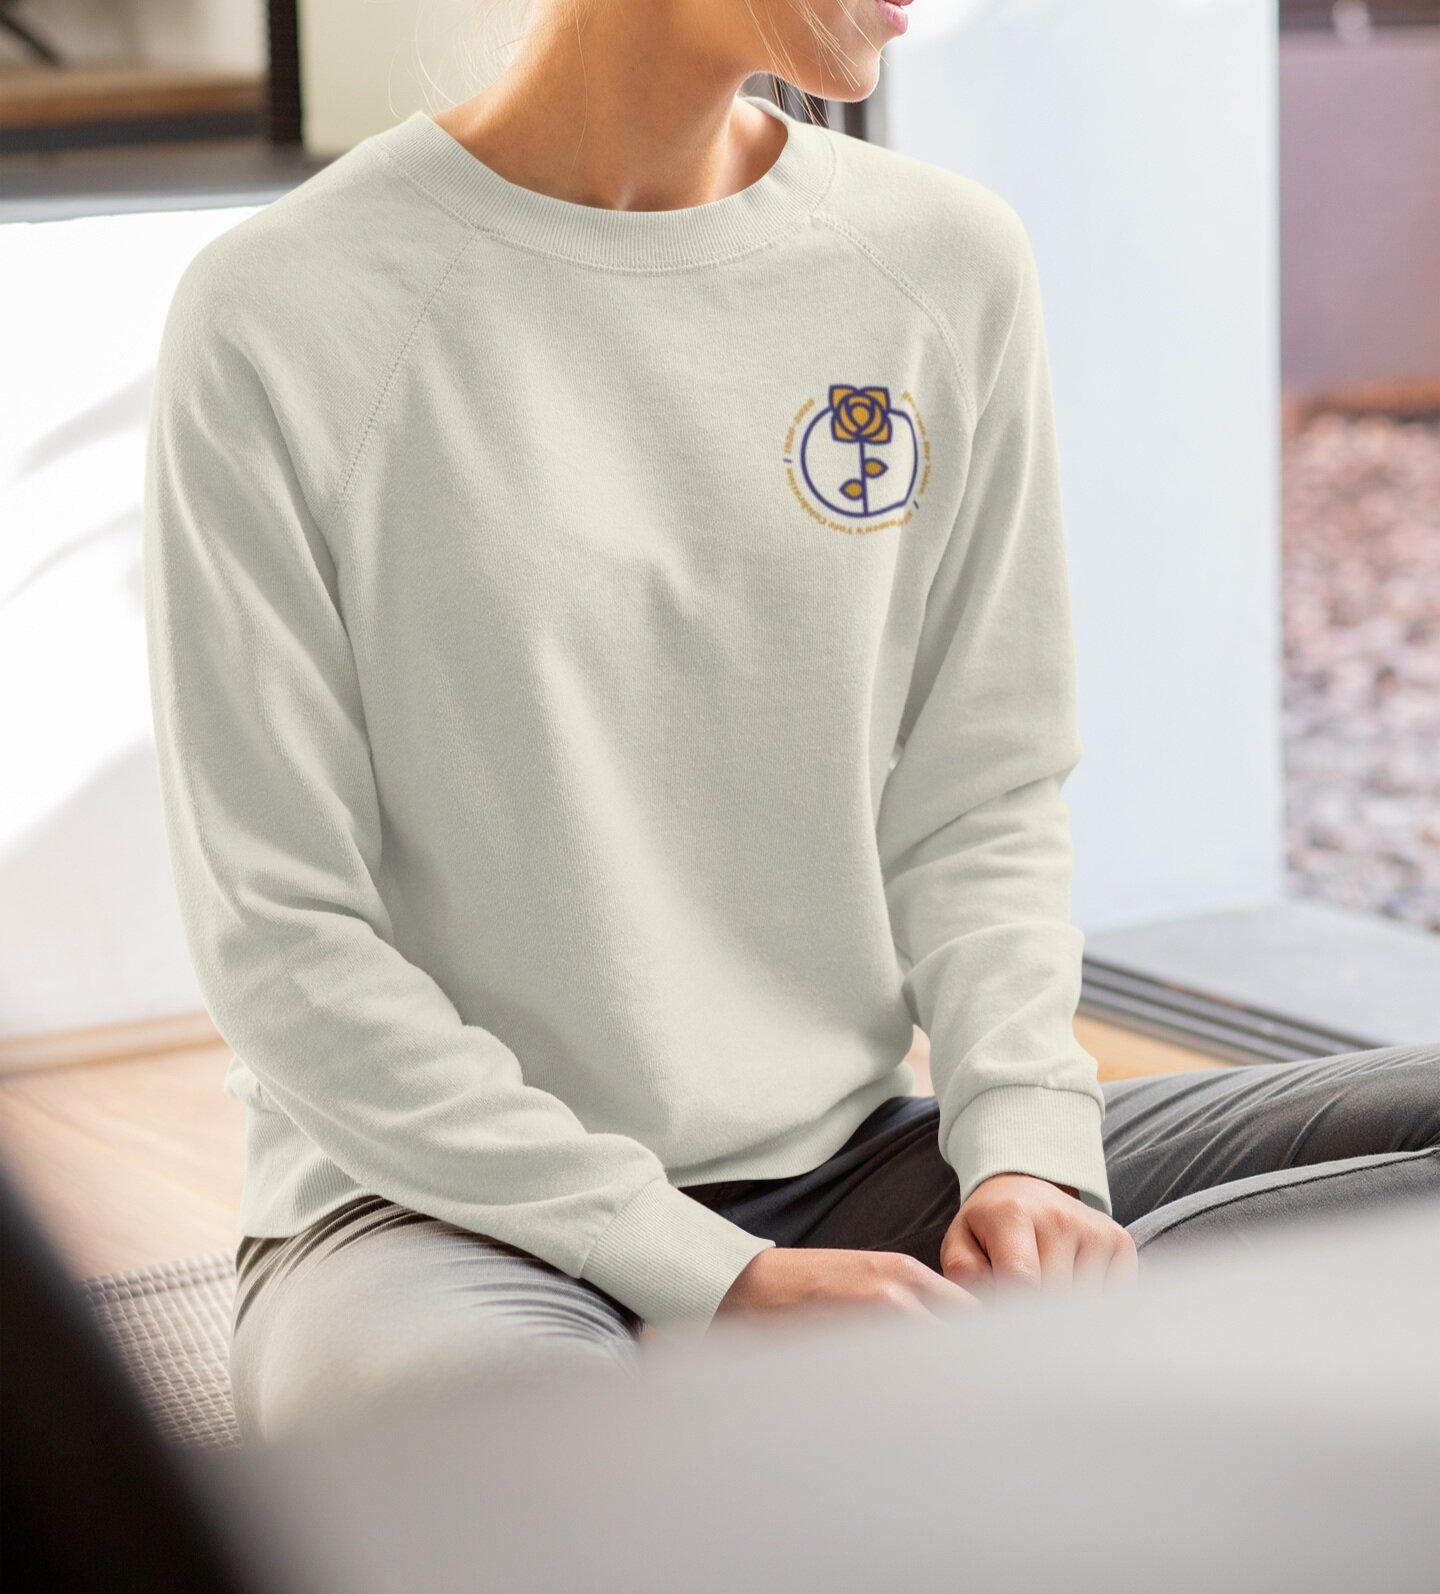 mockup-of-a-young-woman-wearing-a-sublimated-sweatshirt-31250.jpg